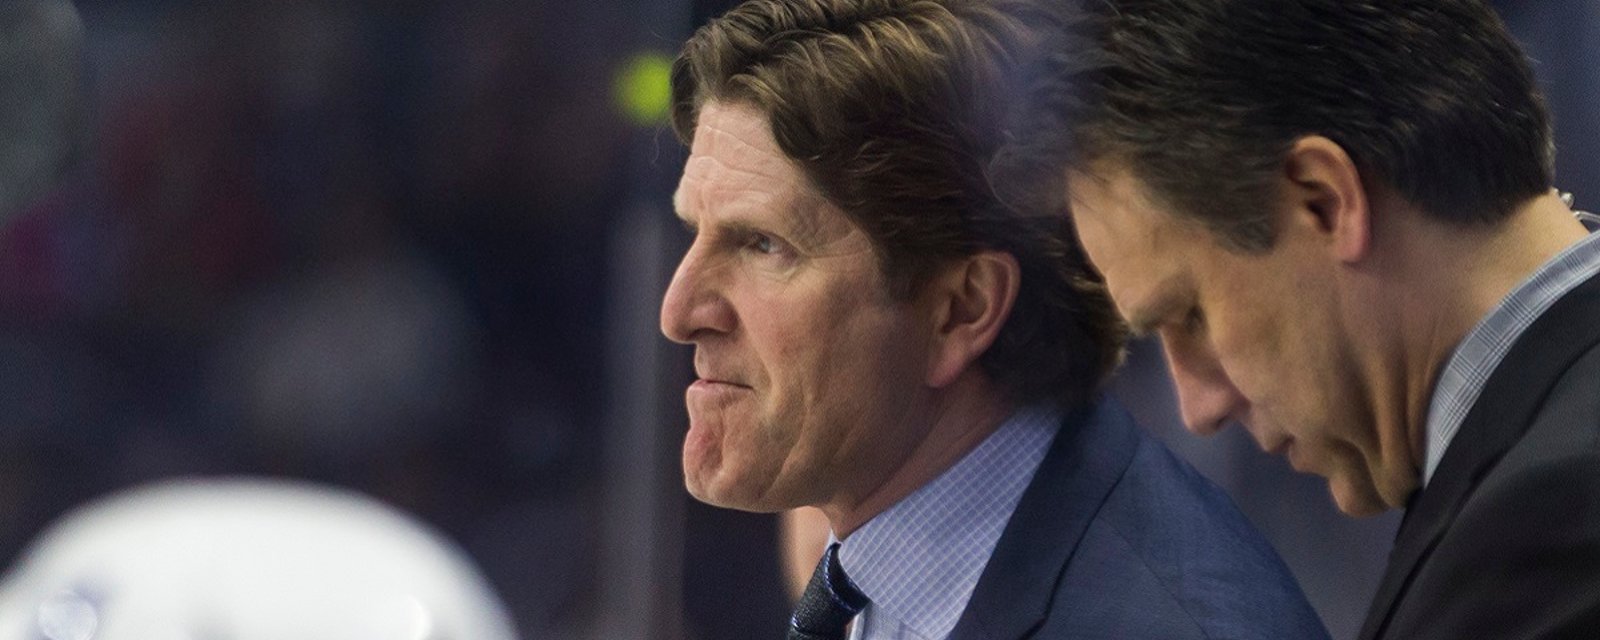 Breaking: Mike Babcock says Tyler Seguin is lying about his injury.